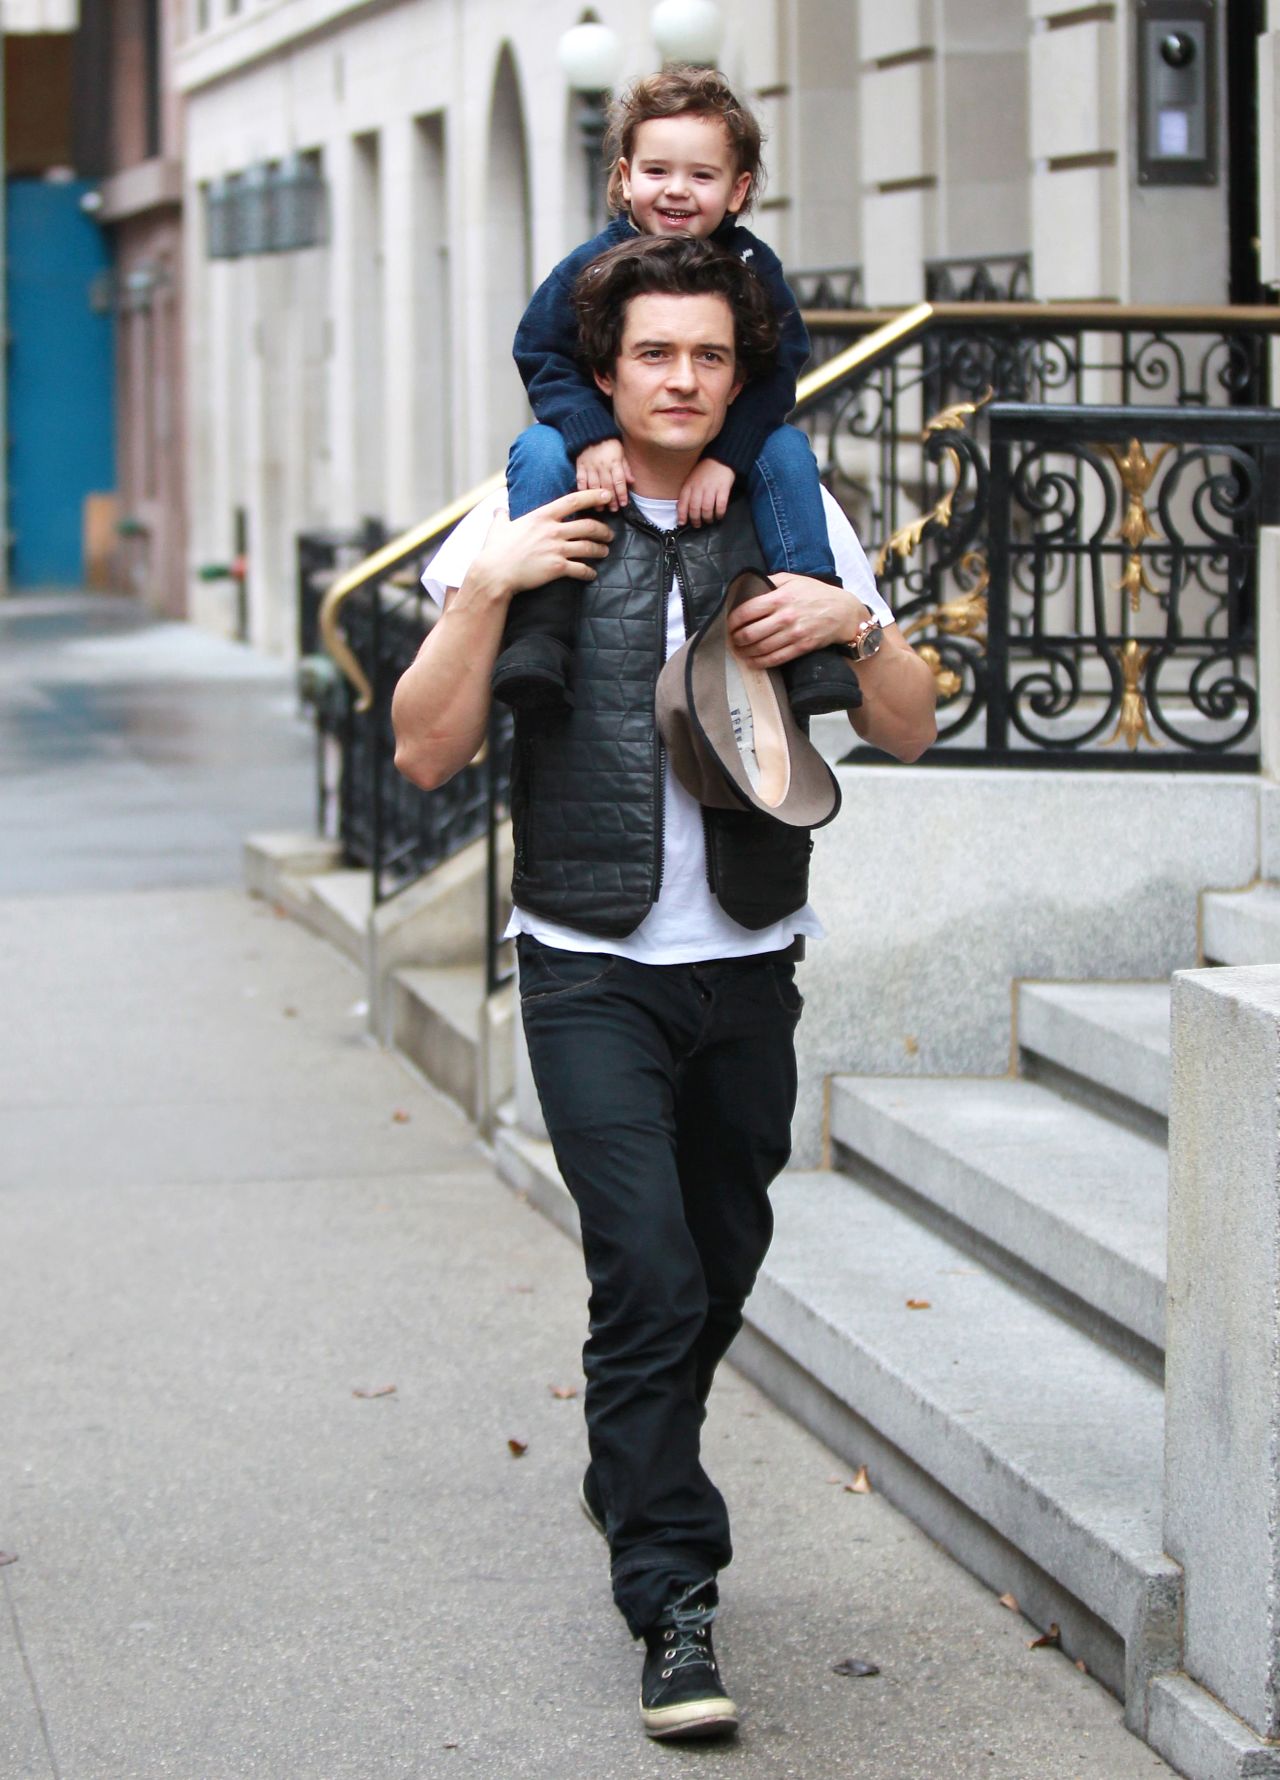 Orlando Bloom and his son Flynn get in some quality time on December 22.